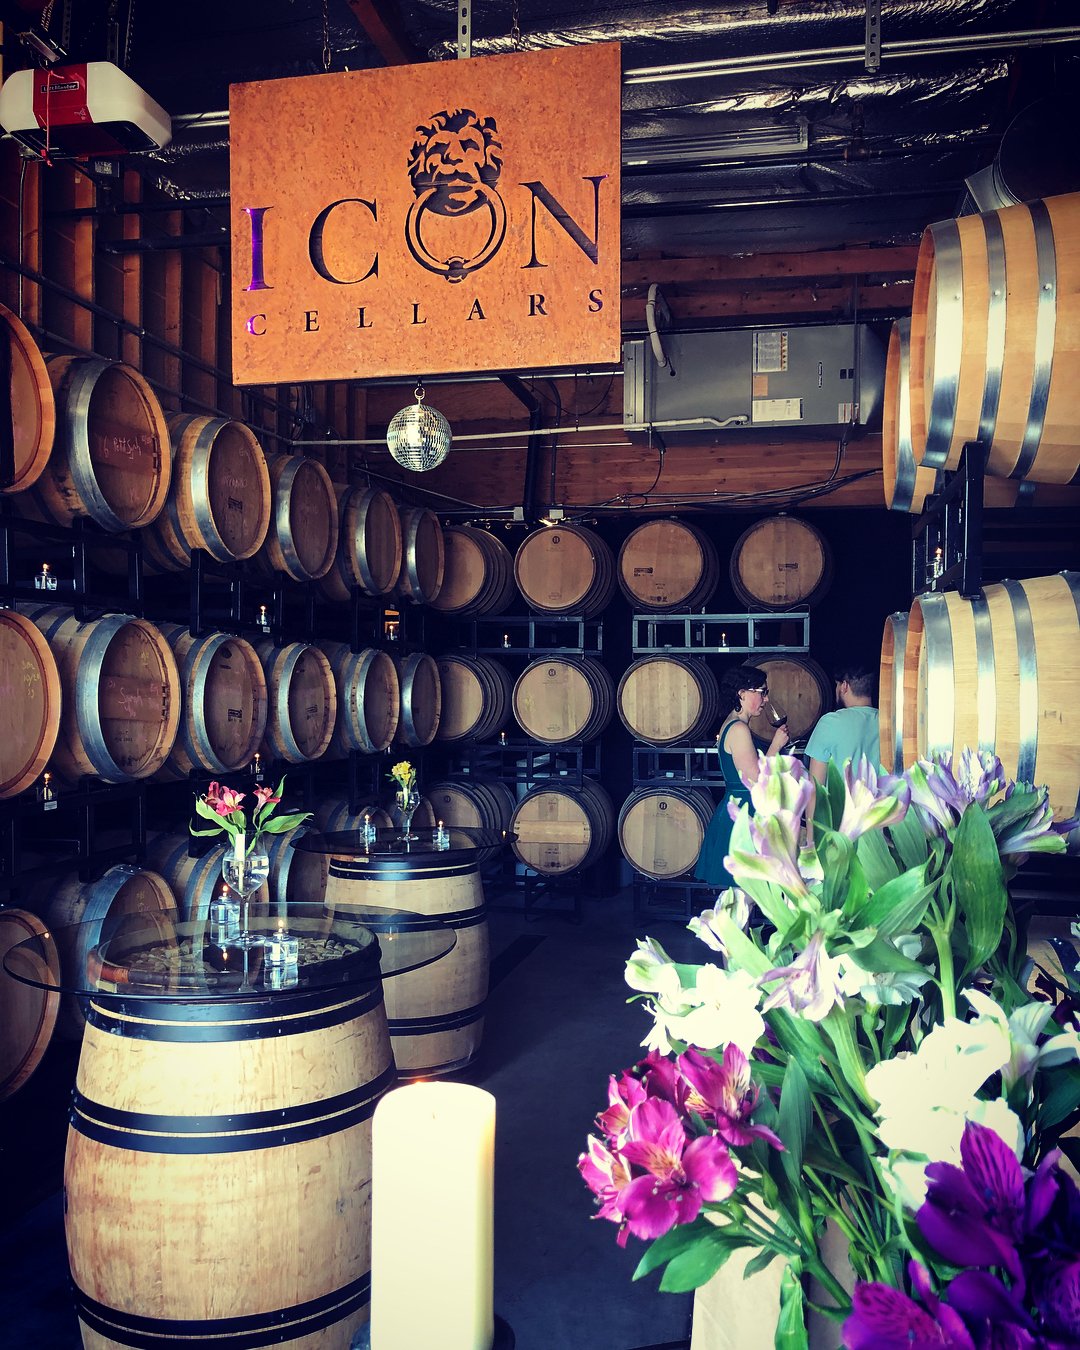 Tasting room filled with barrels of wine at Icon Cellars near Bothell, Washington.